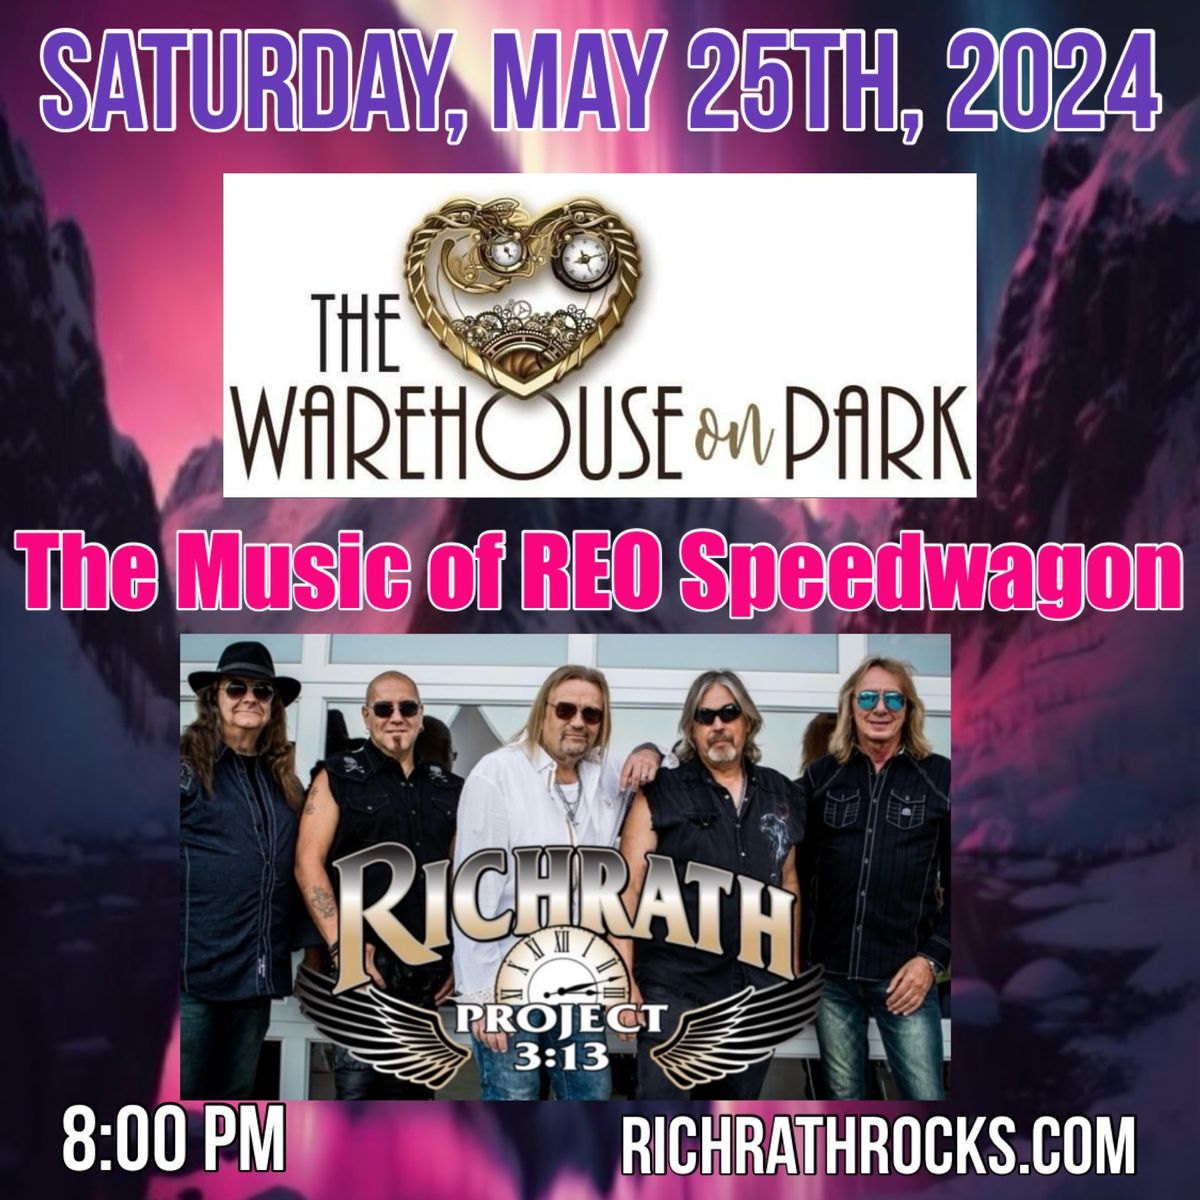 Richrath Project 3:13 Playing the Music of REO Speedwagon @ The Warehouse on Park